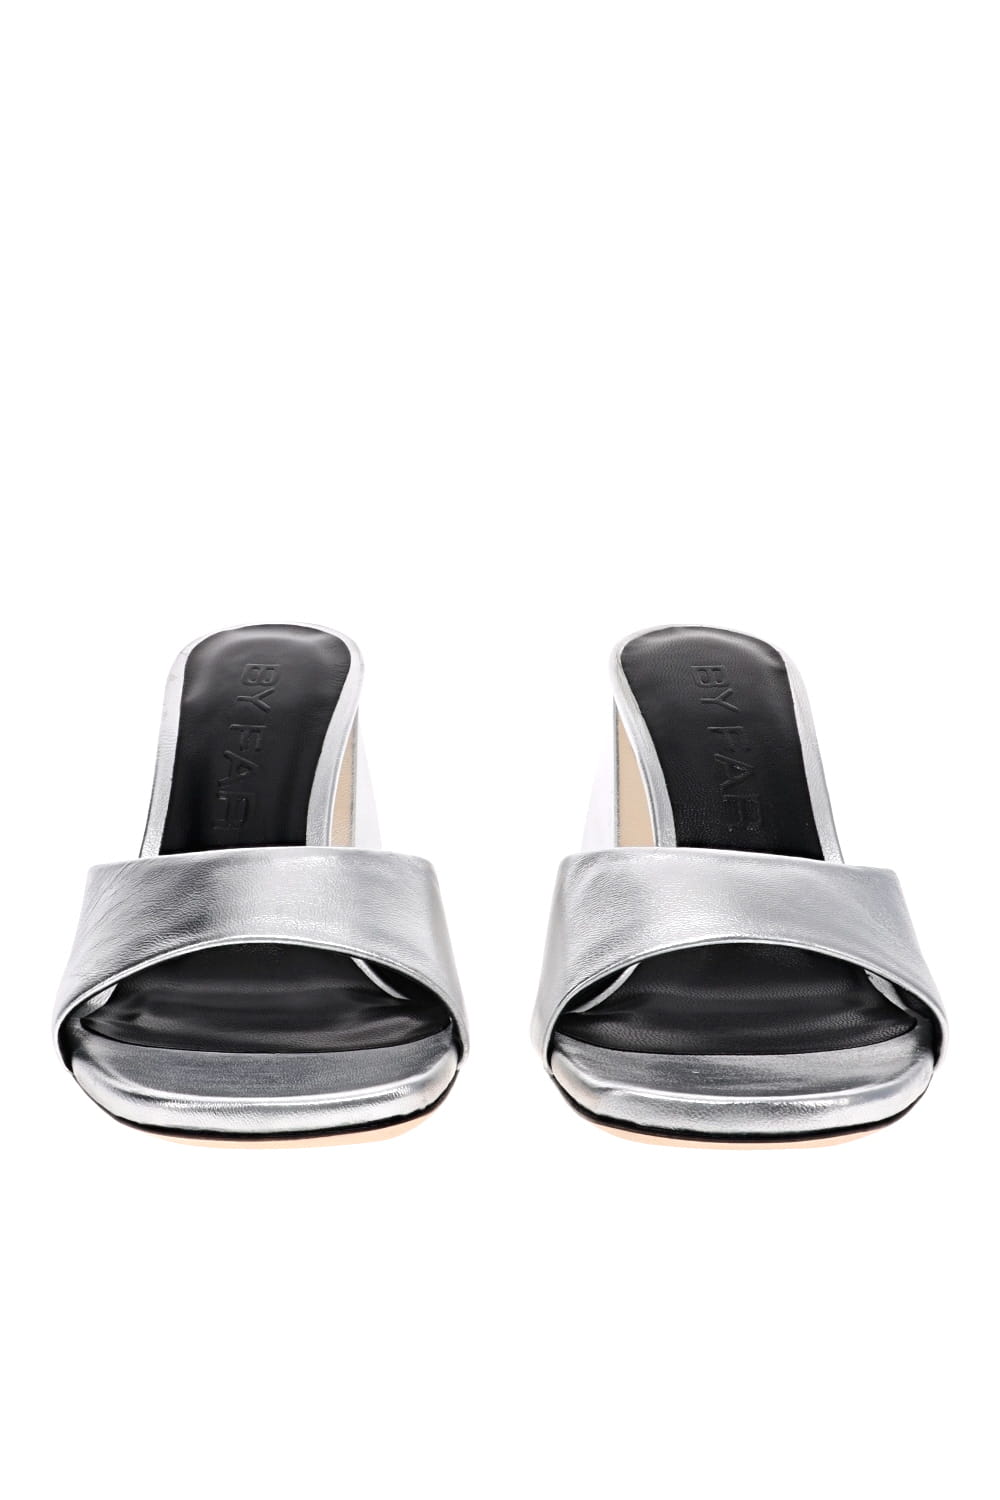 BY FAR Michele Silver Metallic Leather Mules